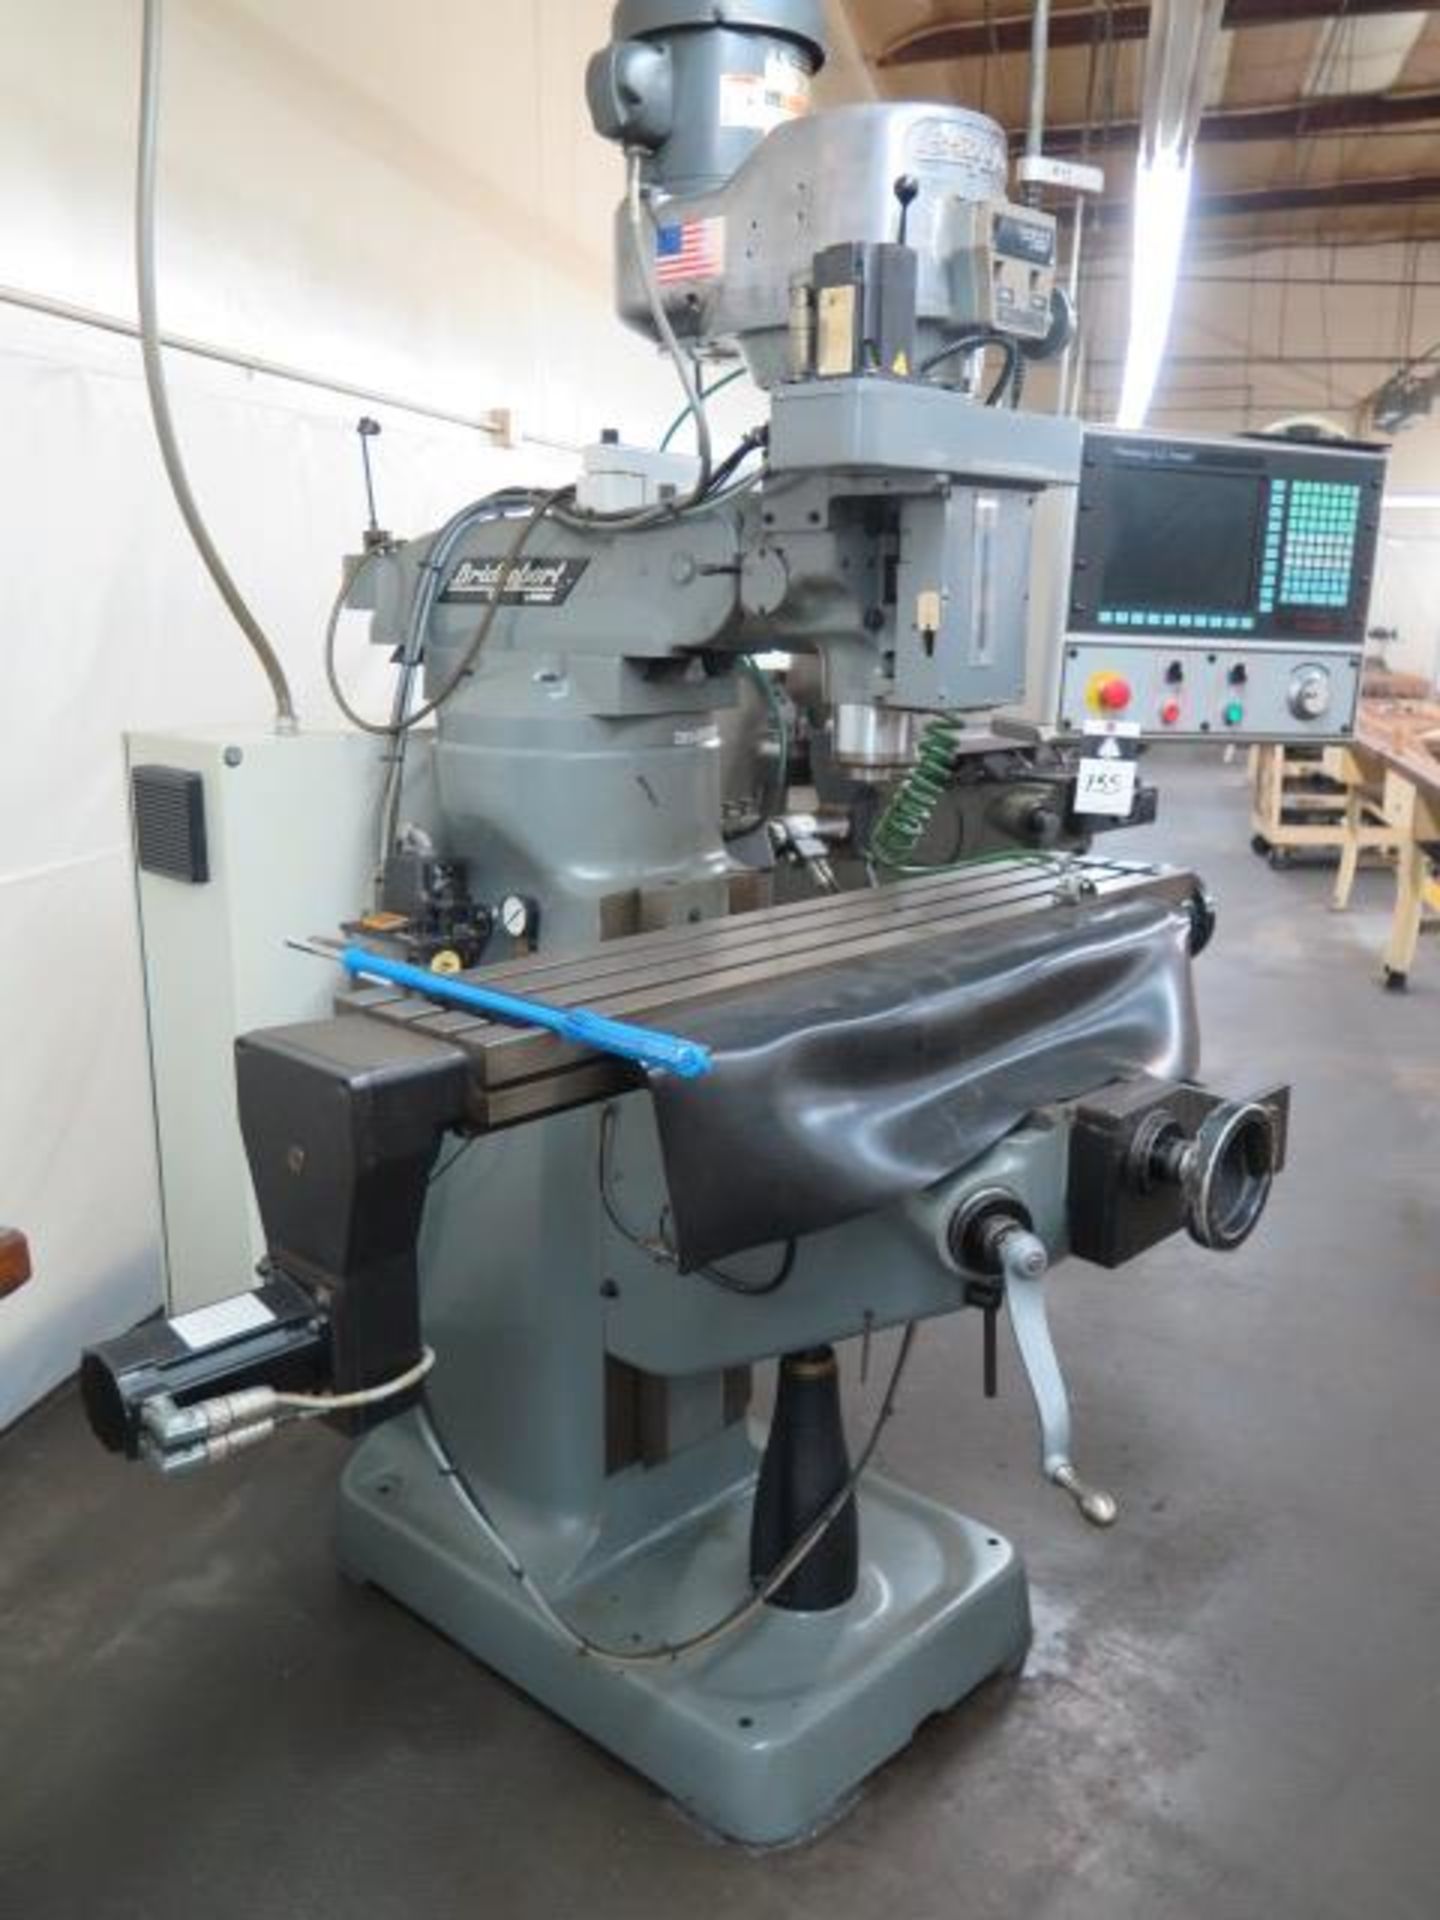 Bridgeport / Hardinge 3-Axis CNC Mill s/n HDNG2098FX w/ Hardinge EZ Vision Controls, 2Hp, SOLD AS IS - Image 2 of 13